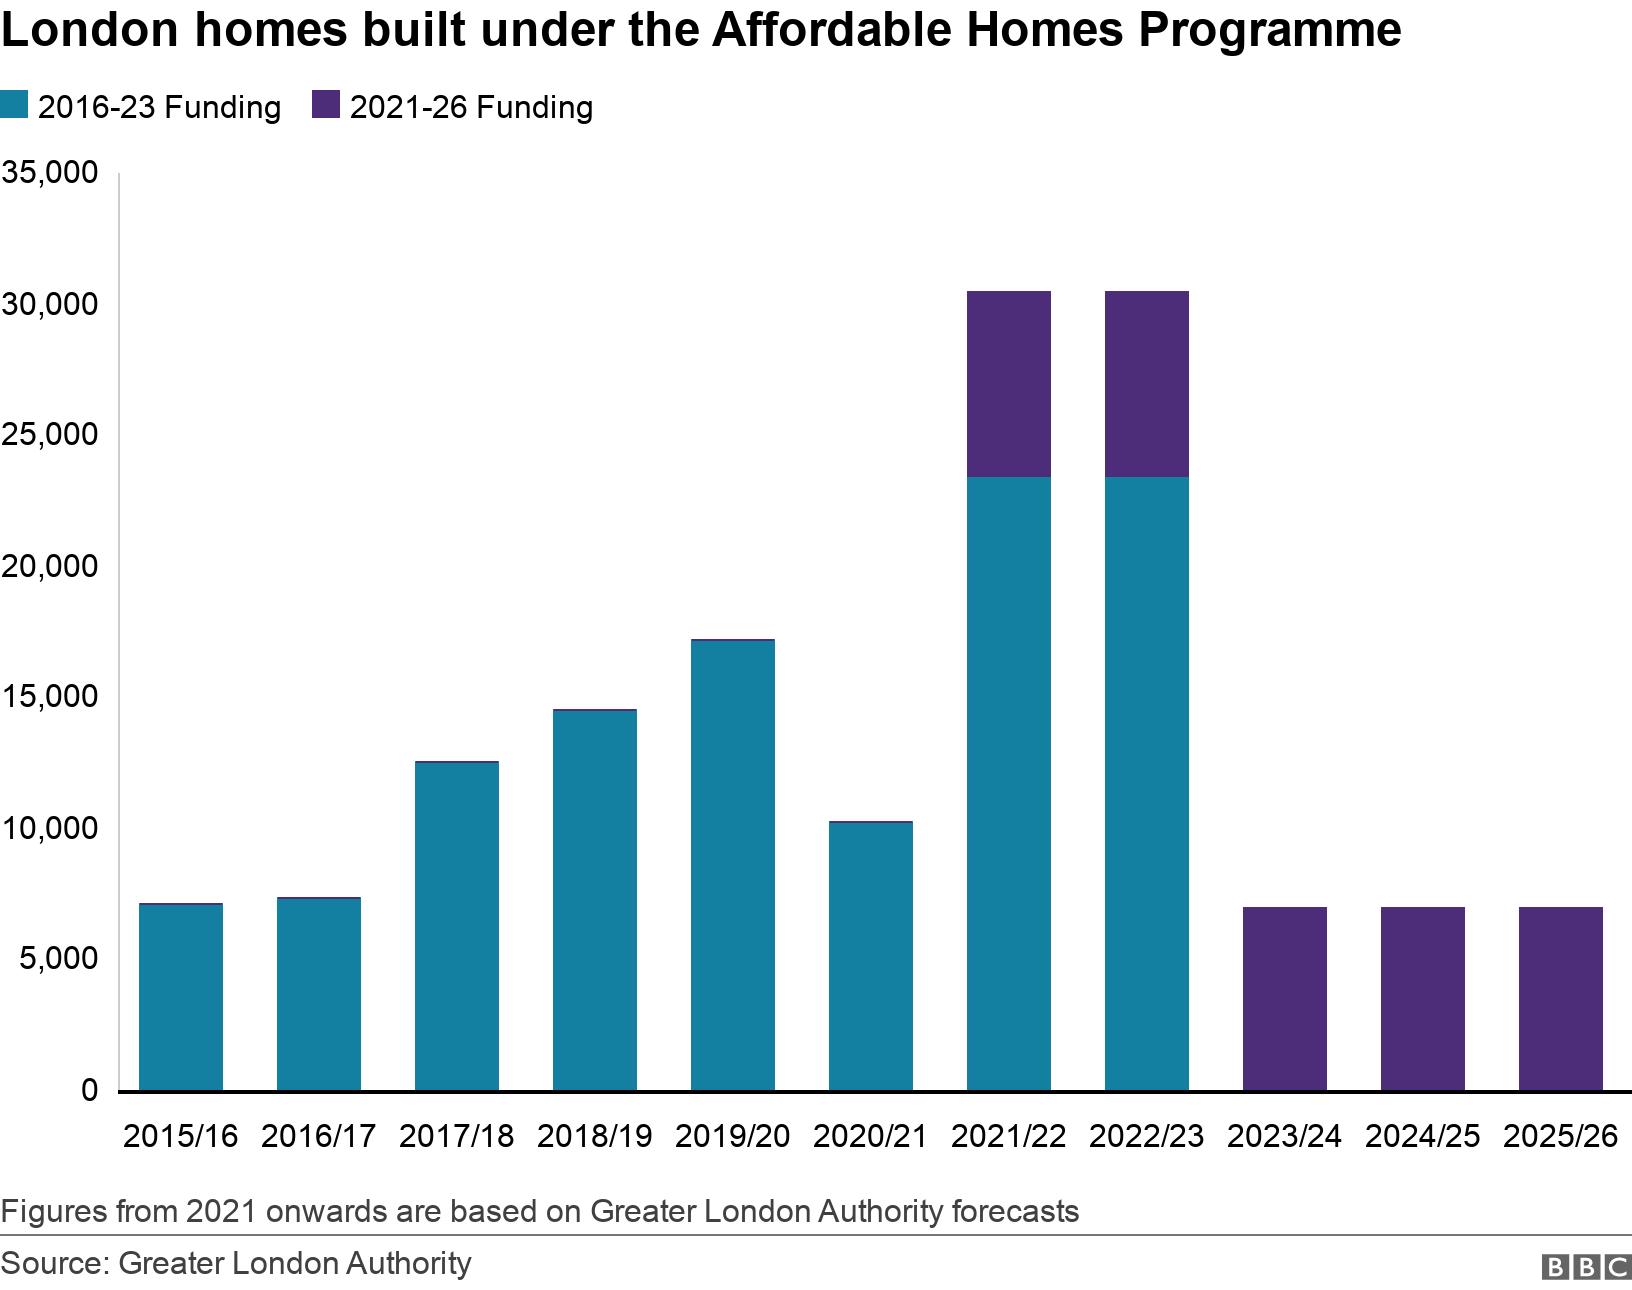 London homes built under the Affordable Homes Programme. .  Figures from 2021 onwards are based on Greater London Authority forecasts.